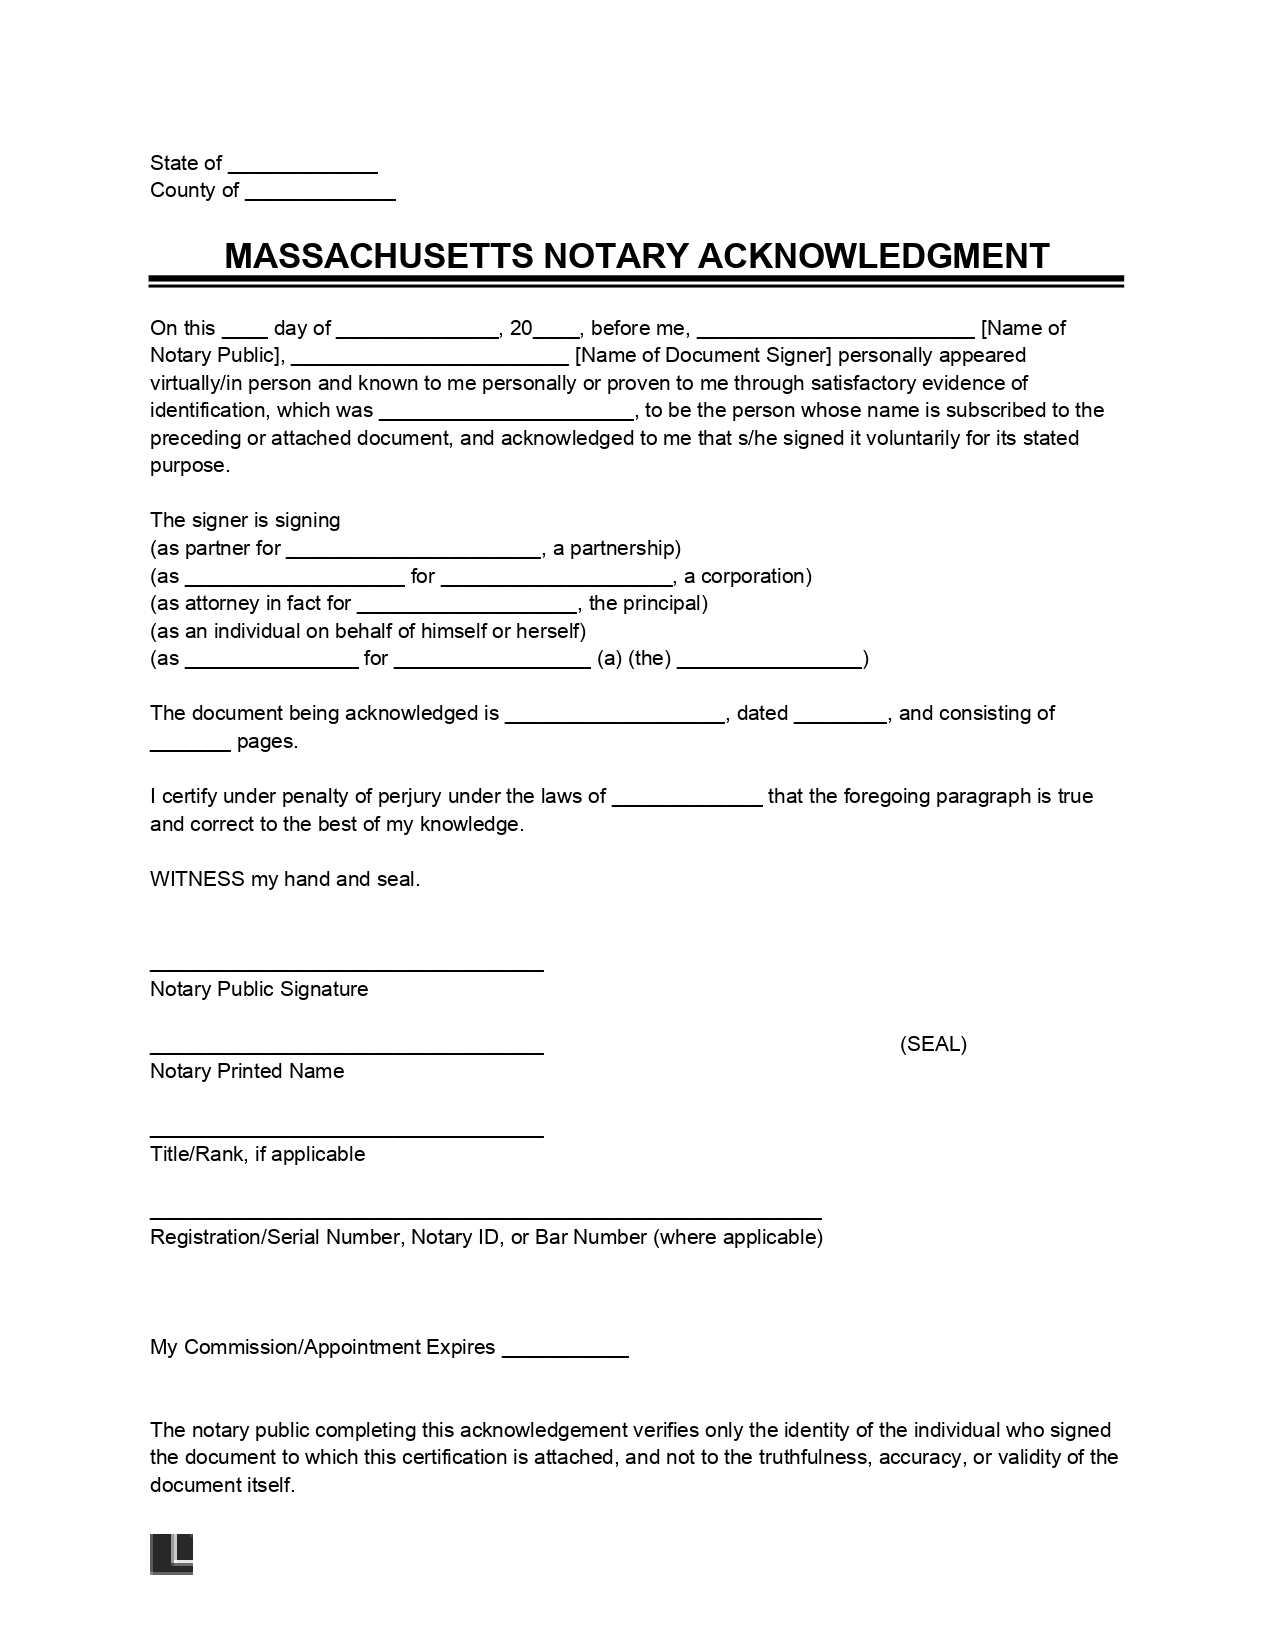 Massachusetts Notary Acknowledgment Form